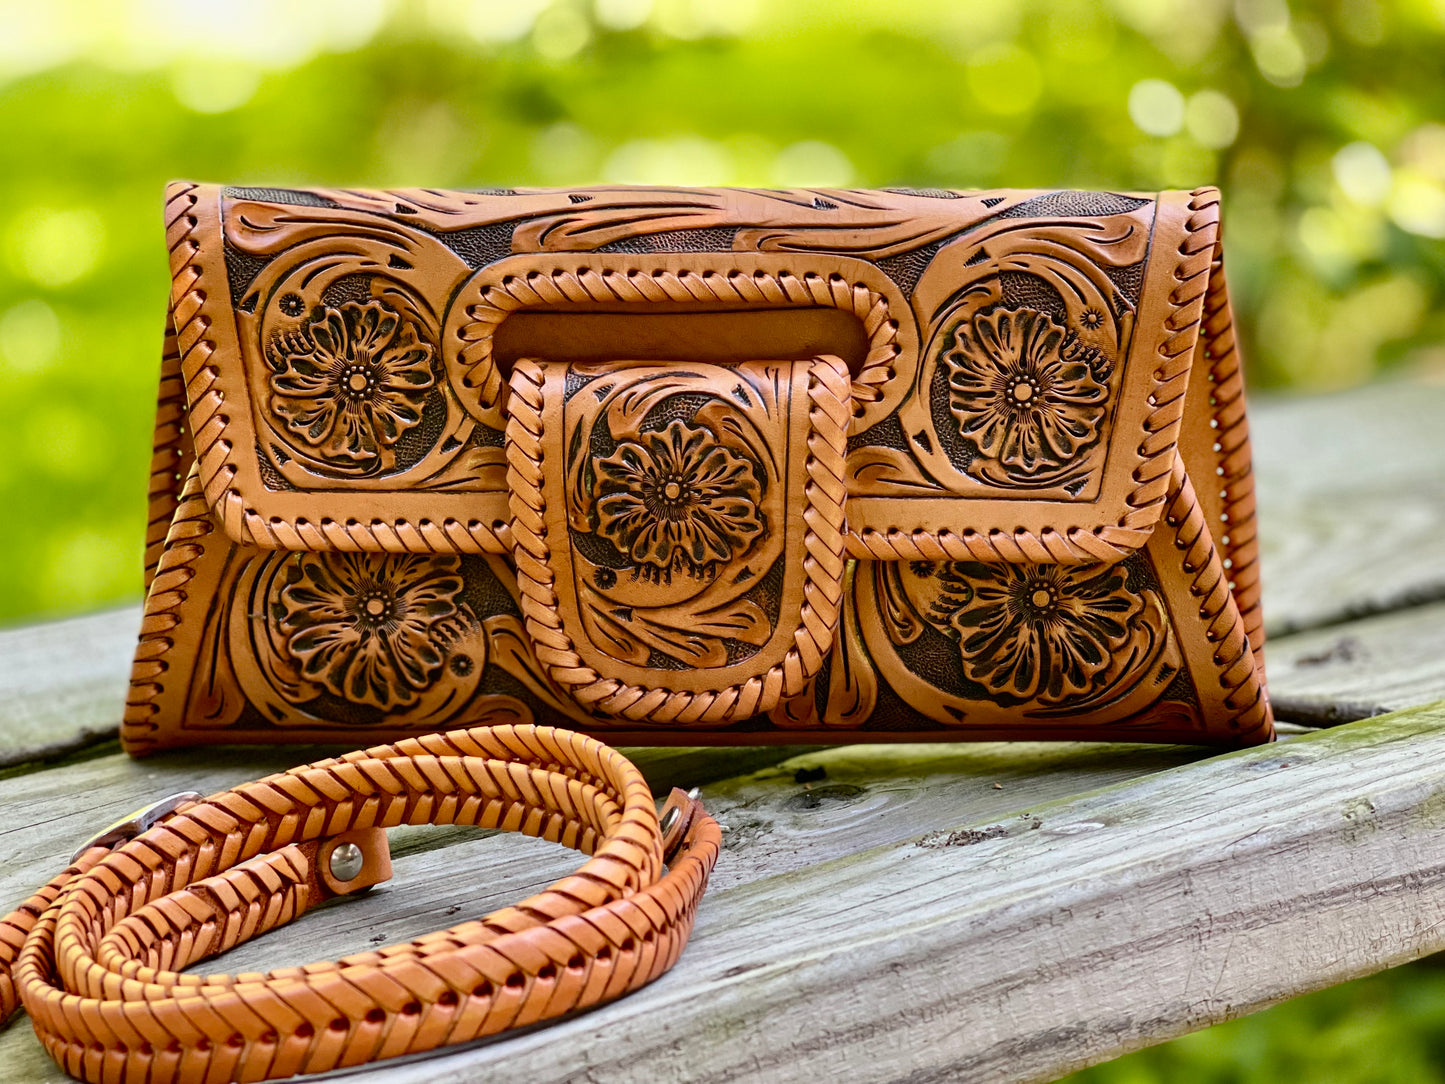 Hand-Tooled Leather Small Clutch & Crossbody "LENGUETA" by ALLE, more colors - ALLE Handbags